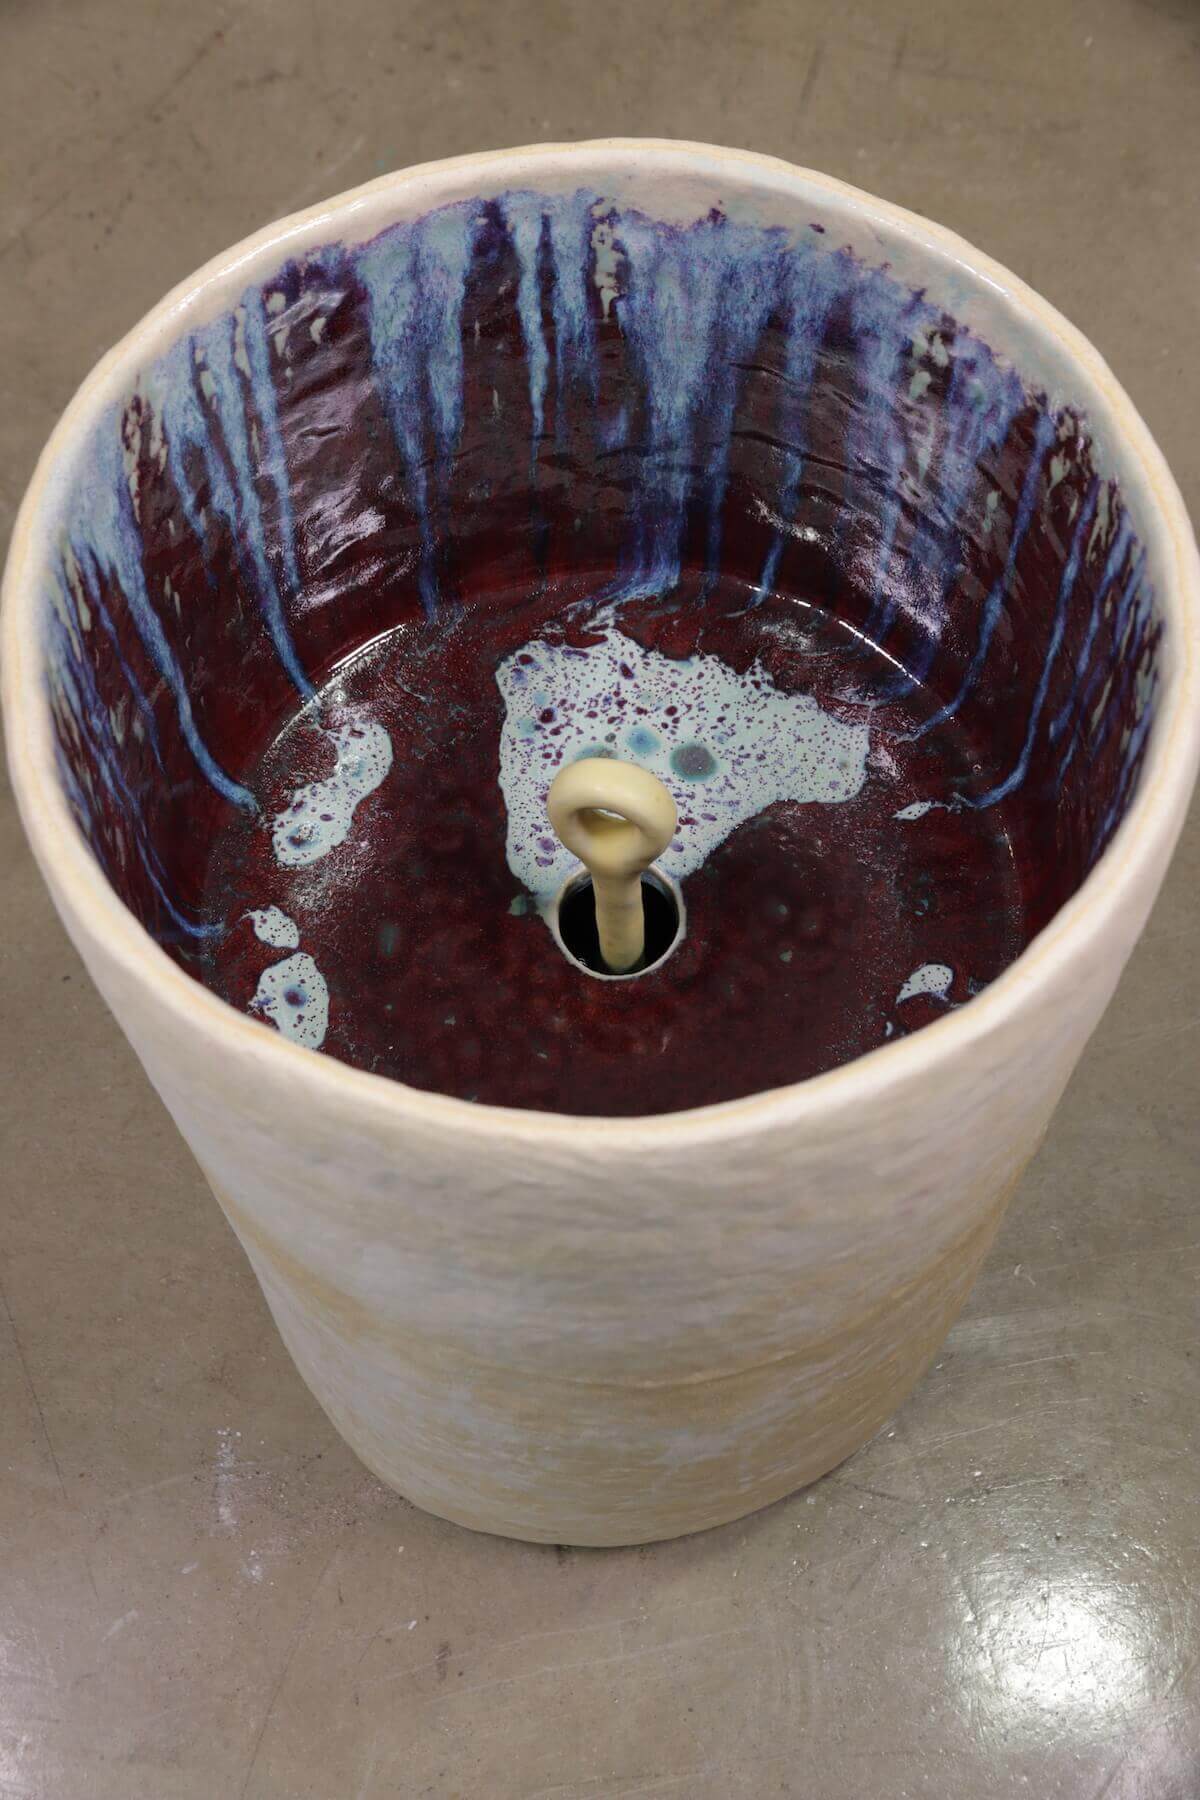 View into interior of white/cream ceramic cylinder with multicolored glaze dripping down sides to pool at the bottom of the structure.